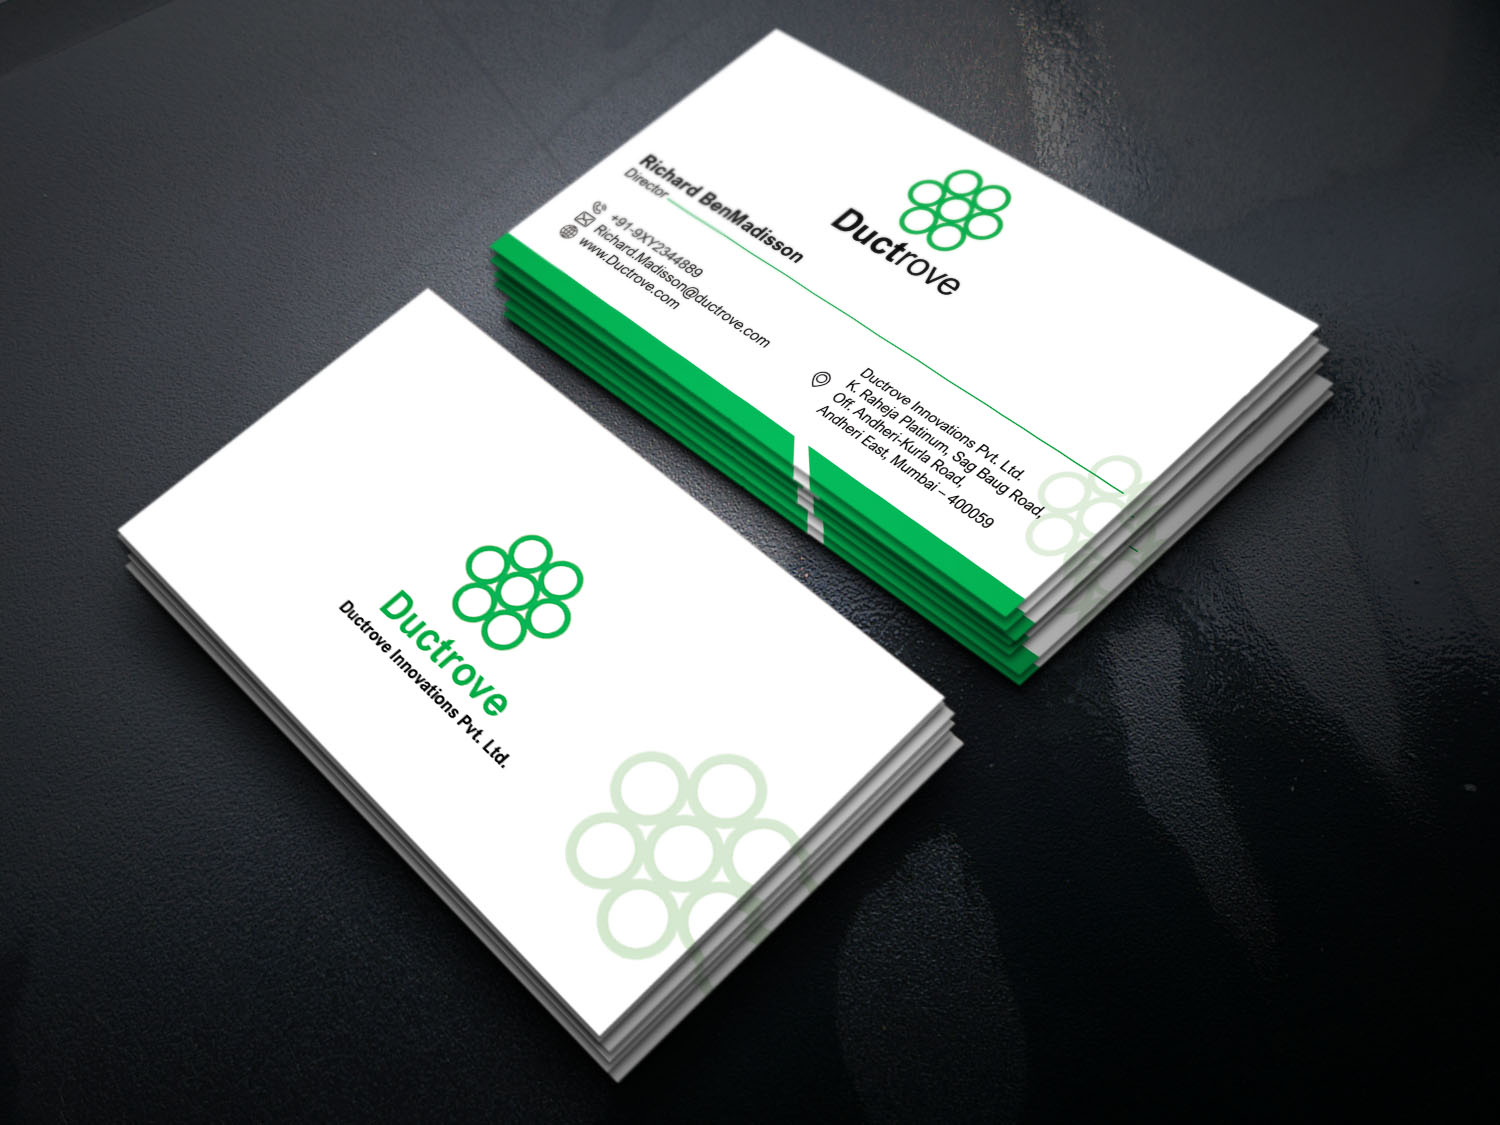 5031I will design professional Business card in 2 Hours